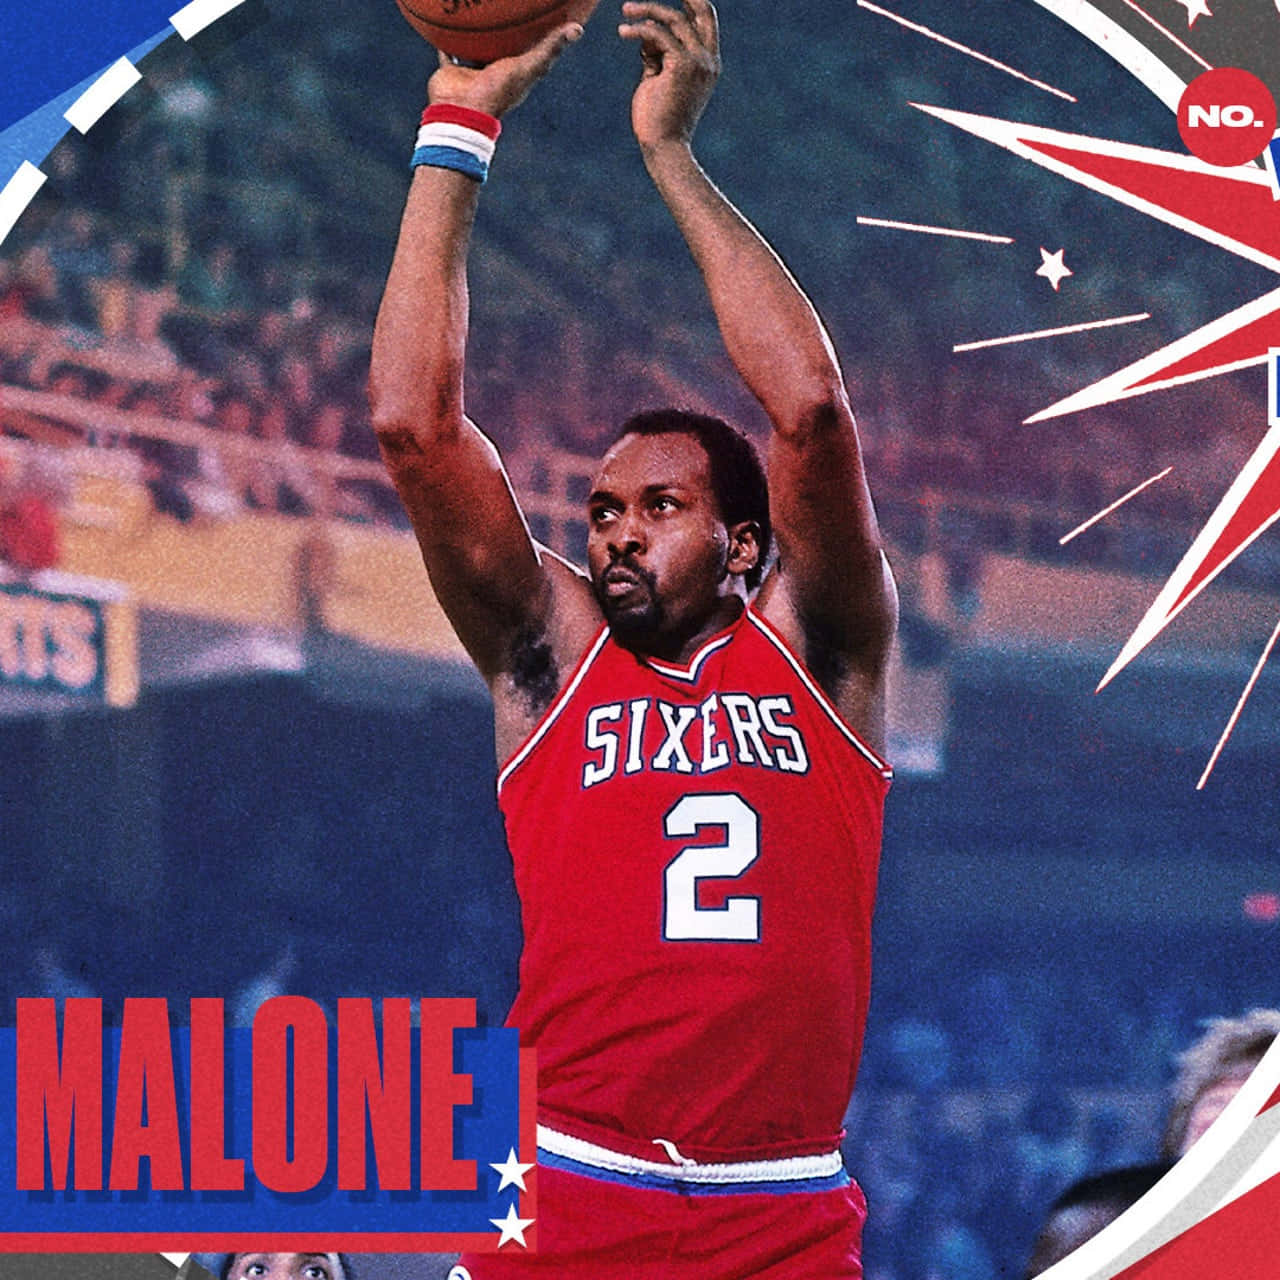 Thetranslation Would Be: Sixers Nummer 2 Moses Malone. Wallpaper